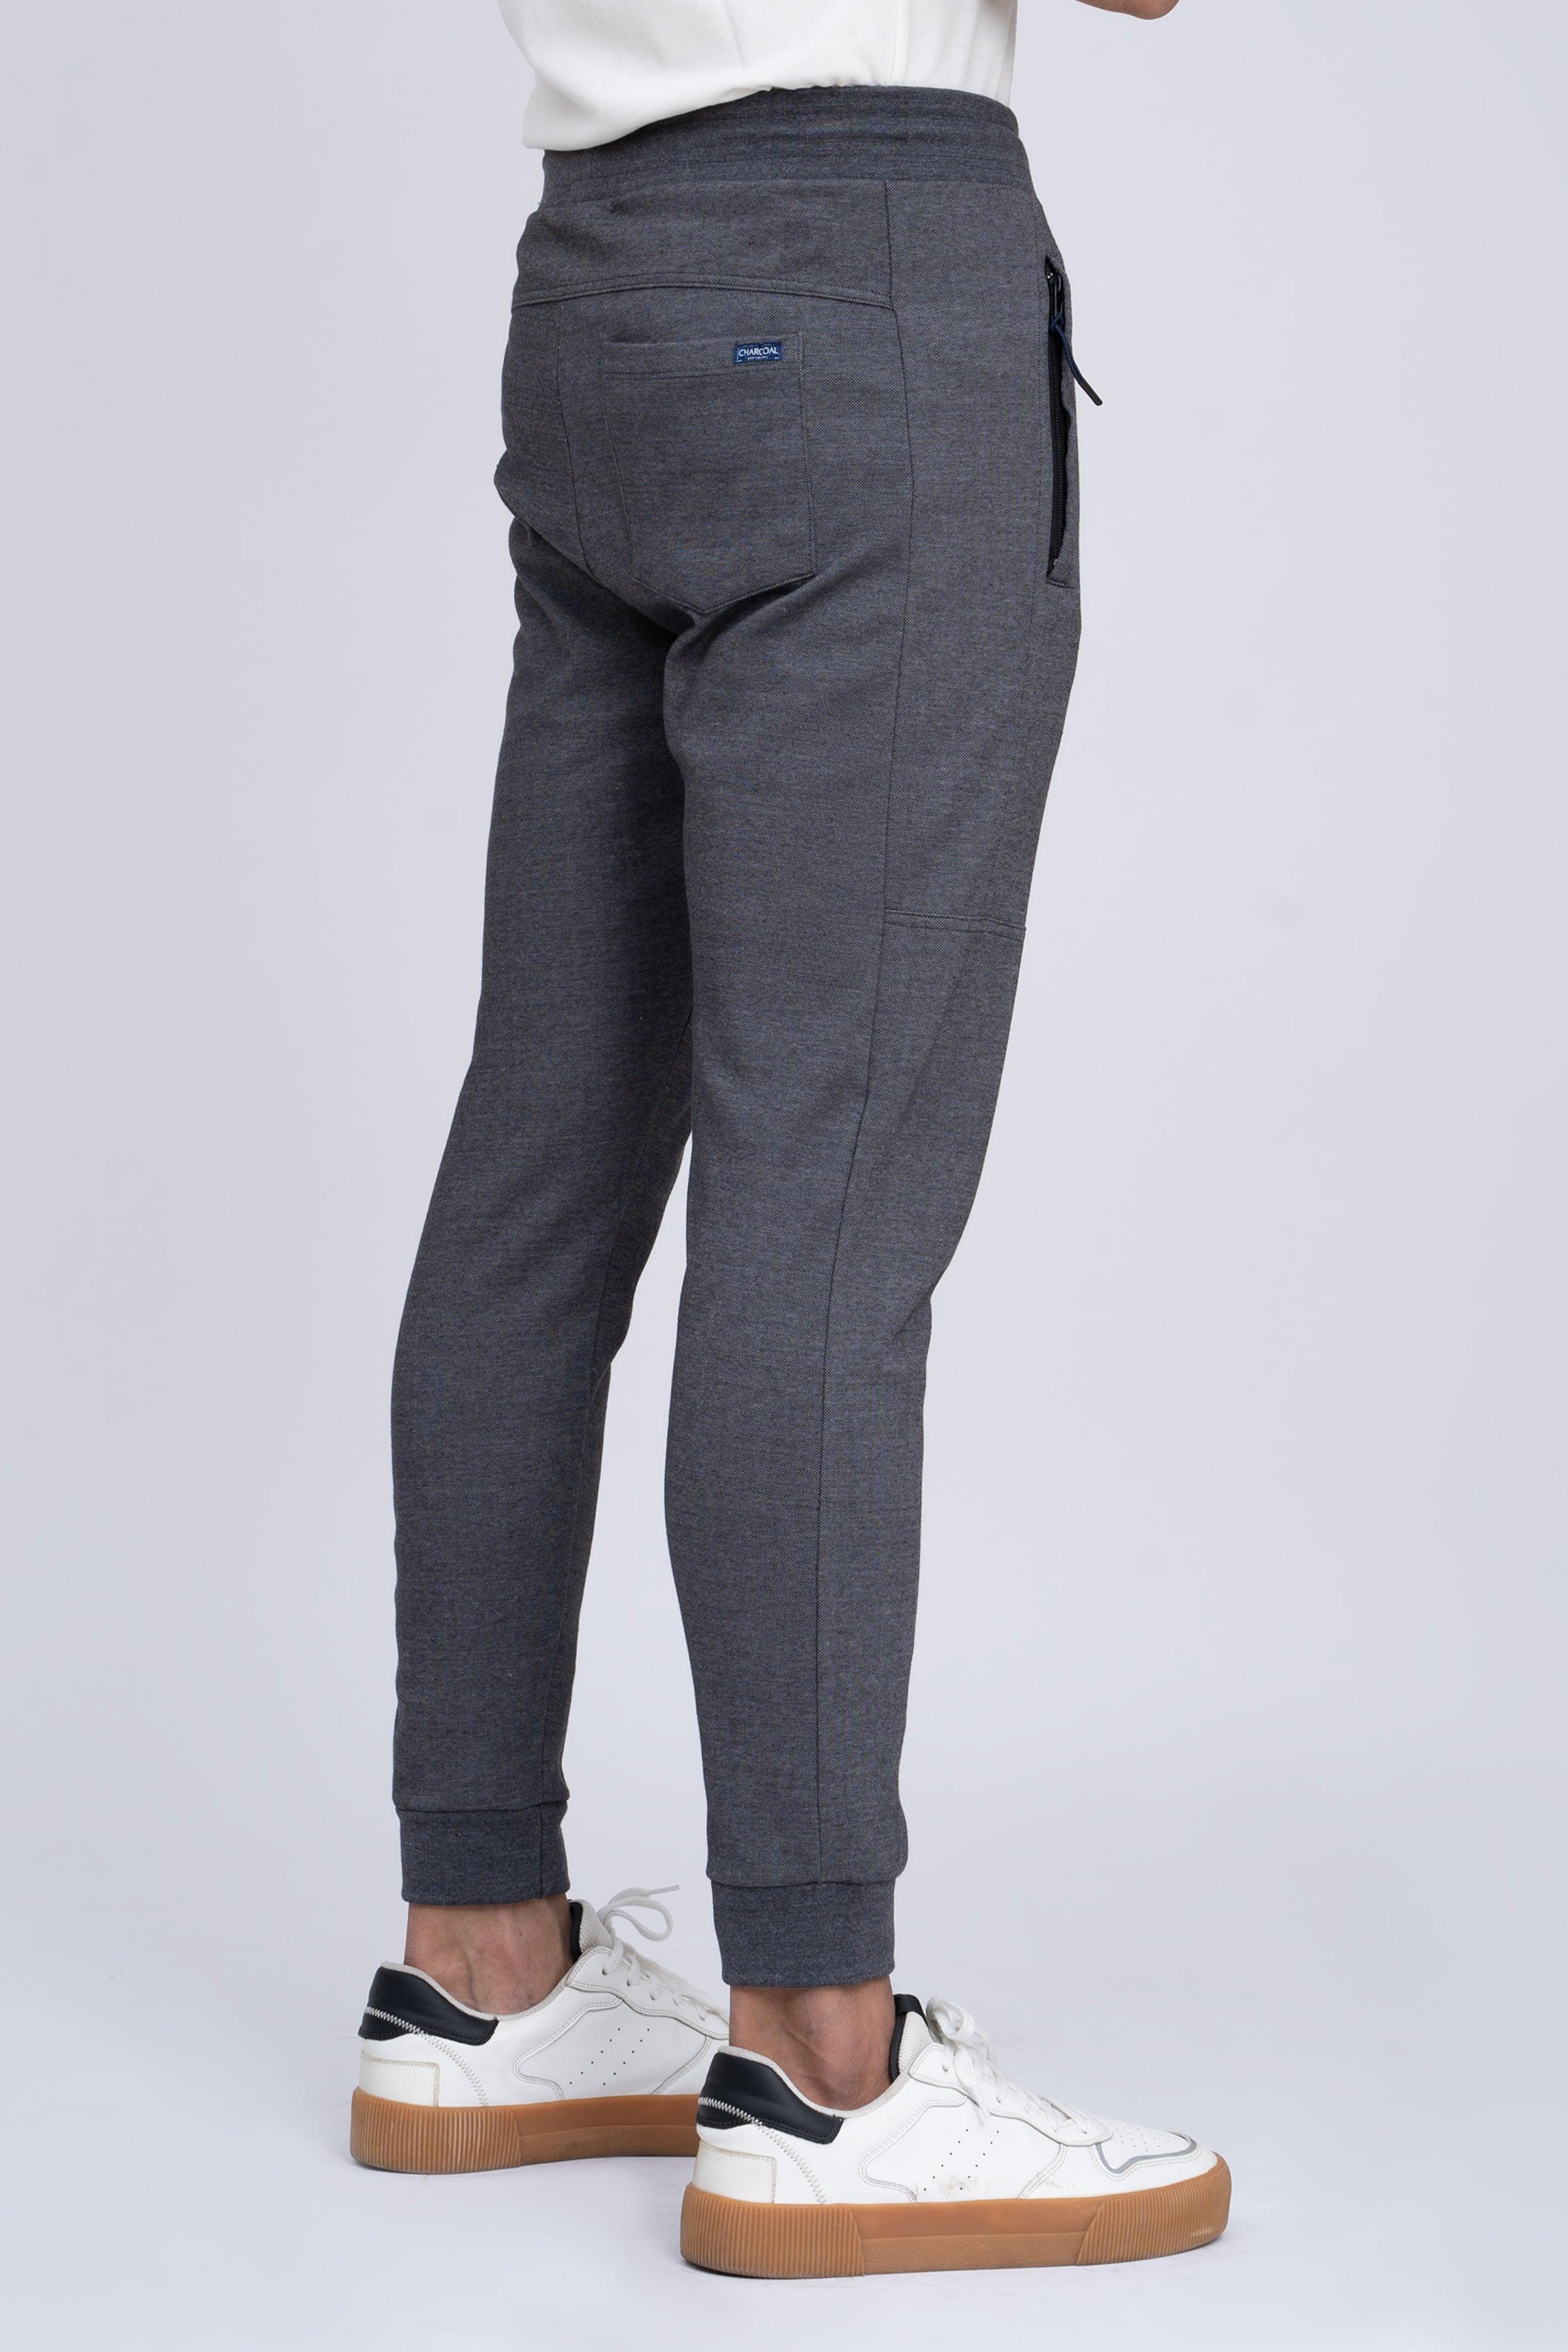 PIQUE INTERLOCK TROUSER CHARCOAL at Charcoal Clothing